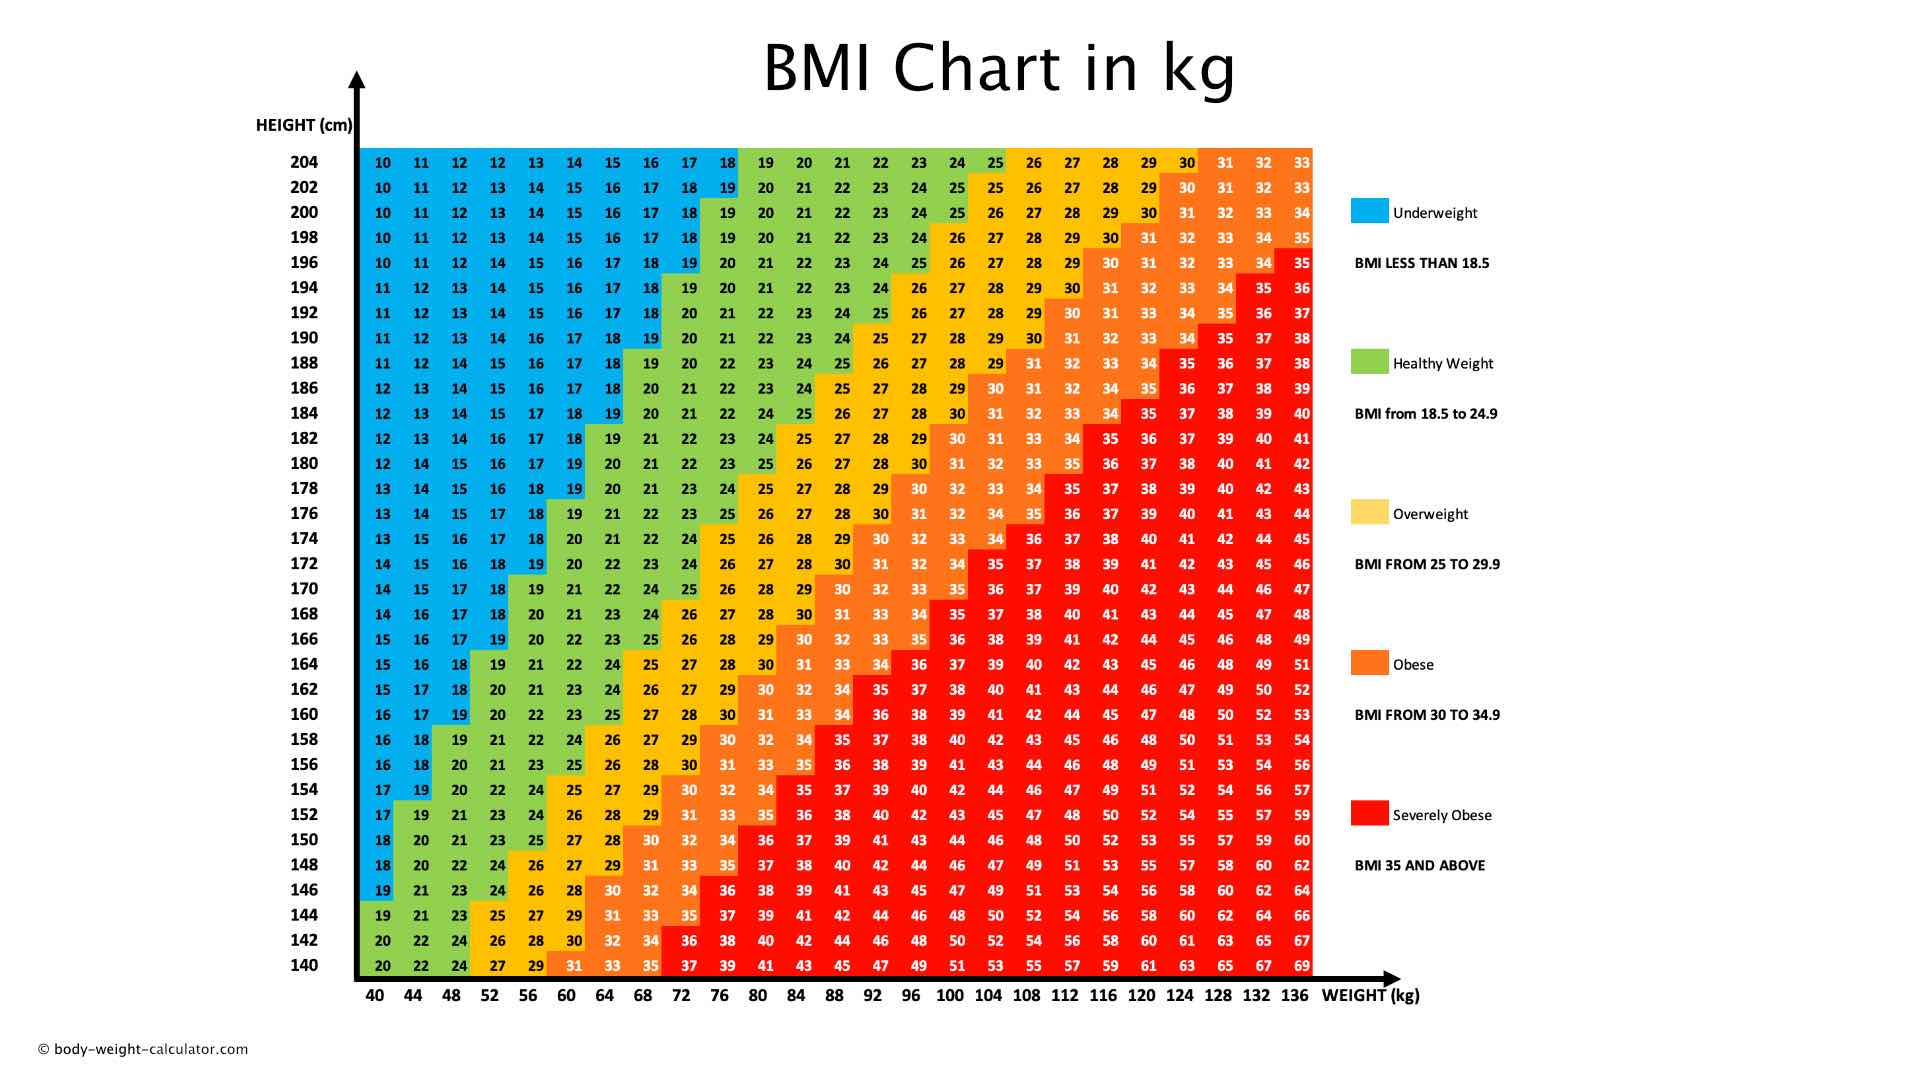 BMI chart by age in Ireland